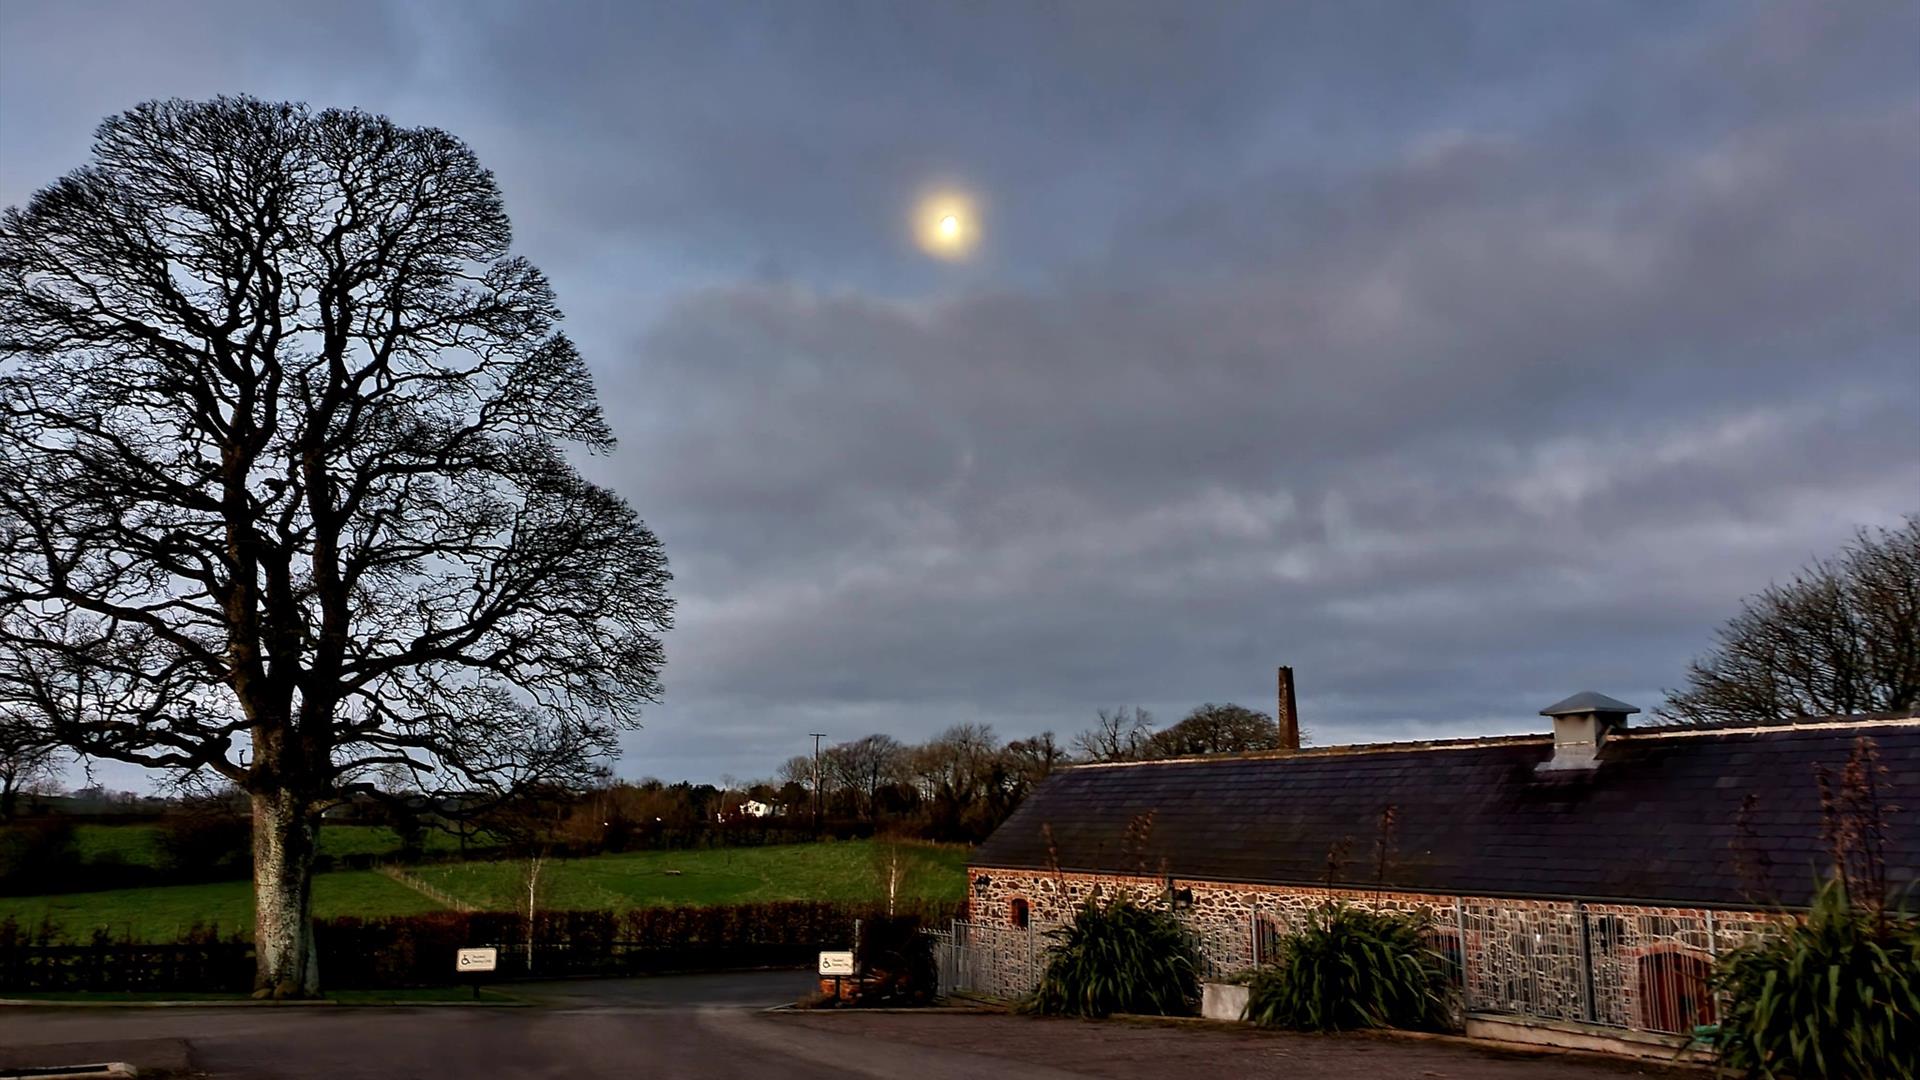 Image shows the stone building of Mill farm on the right hand side with a large tree to the left and overlooked by moonlight